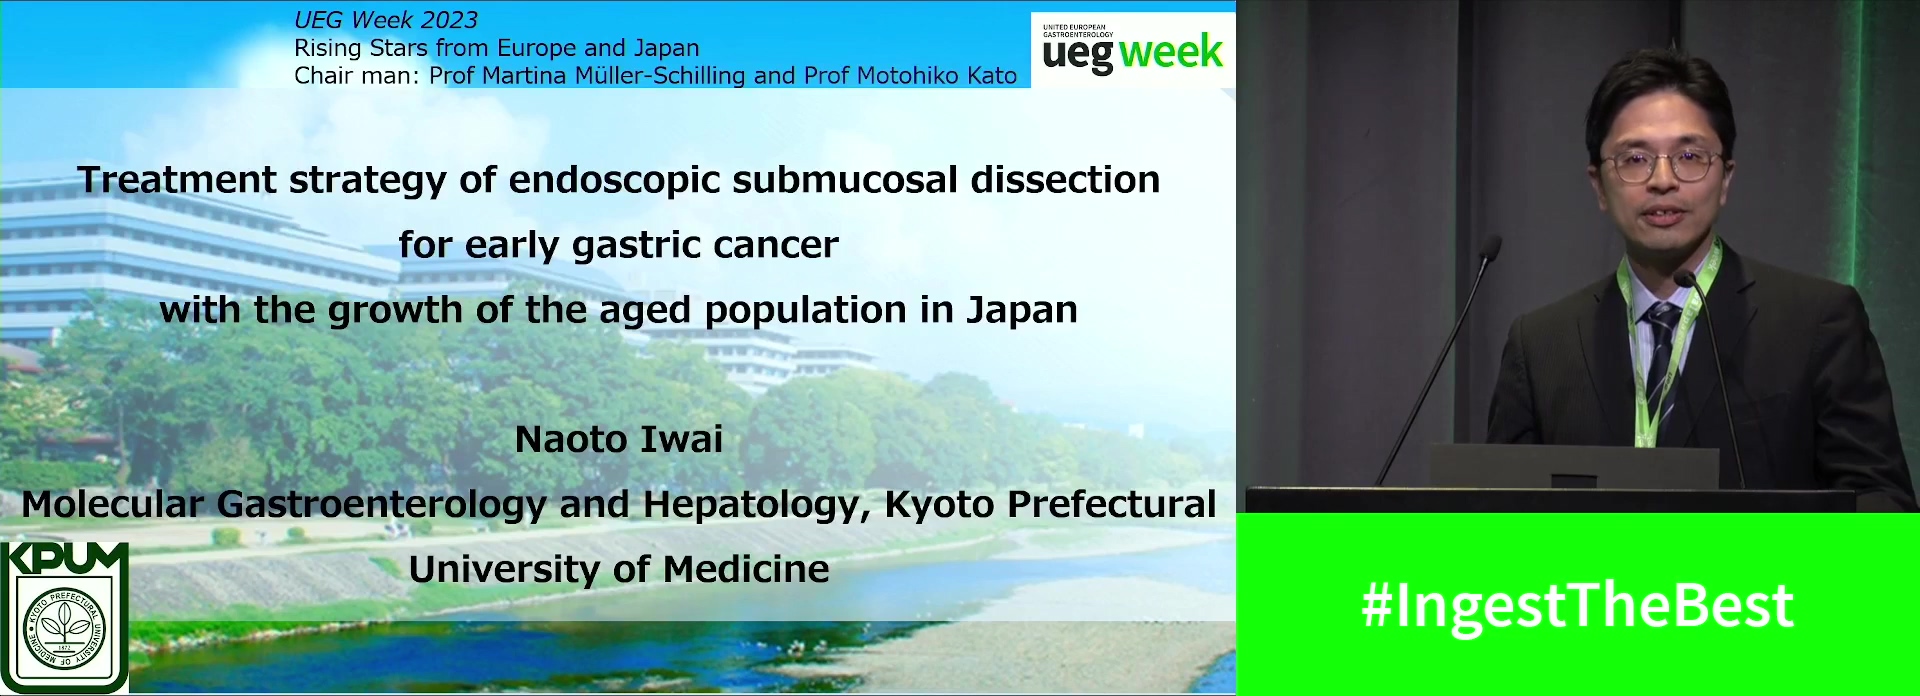 Treatment strategy of endoscopic submucosal dissection for early gastric cancer with the growth of the aged population in Japan